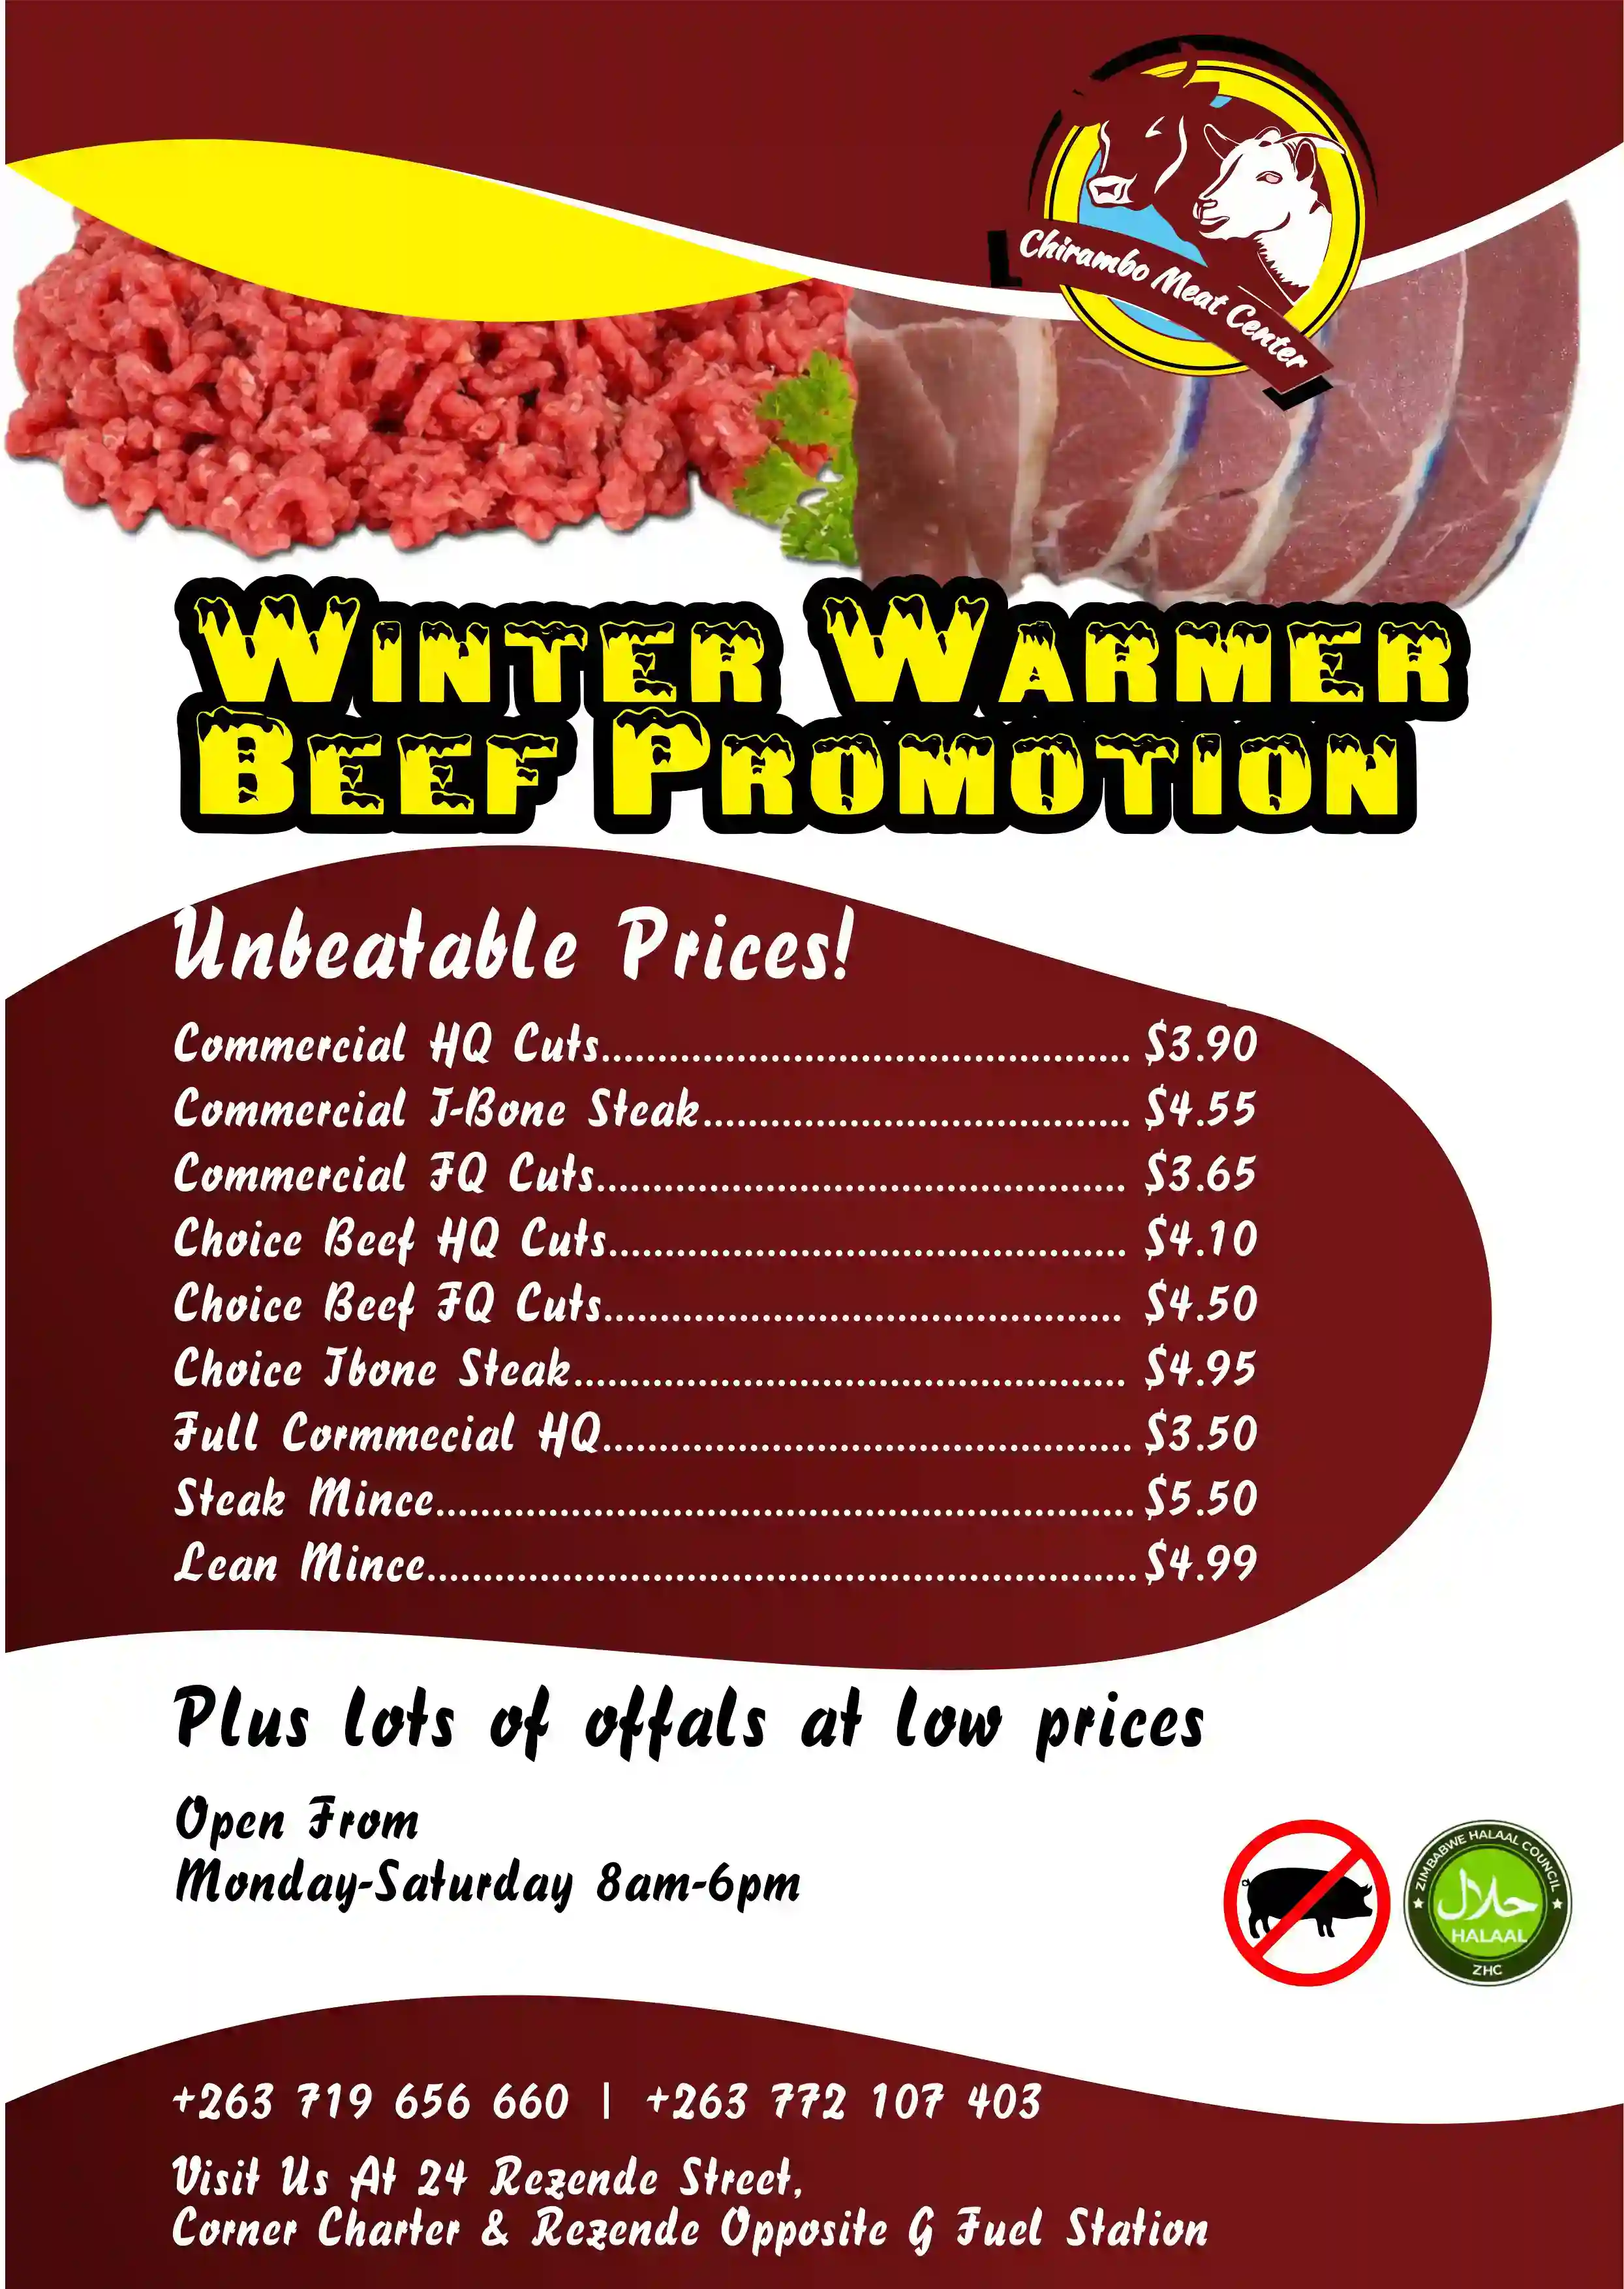 FRESH QUALITY MEAT @ UNBETABLE PRICES